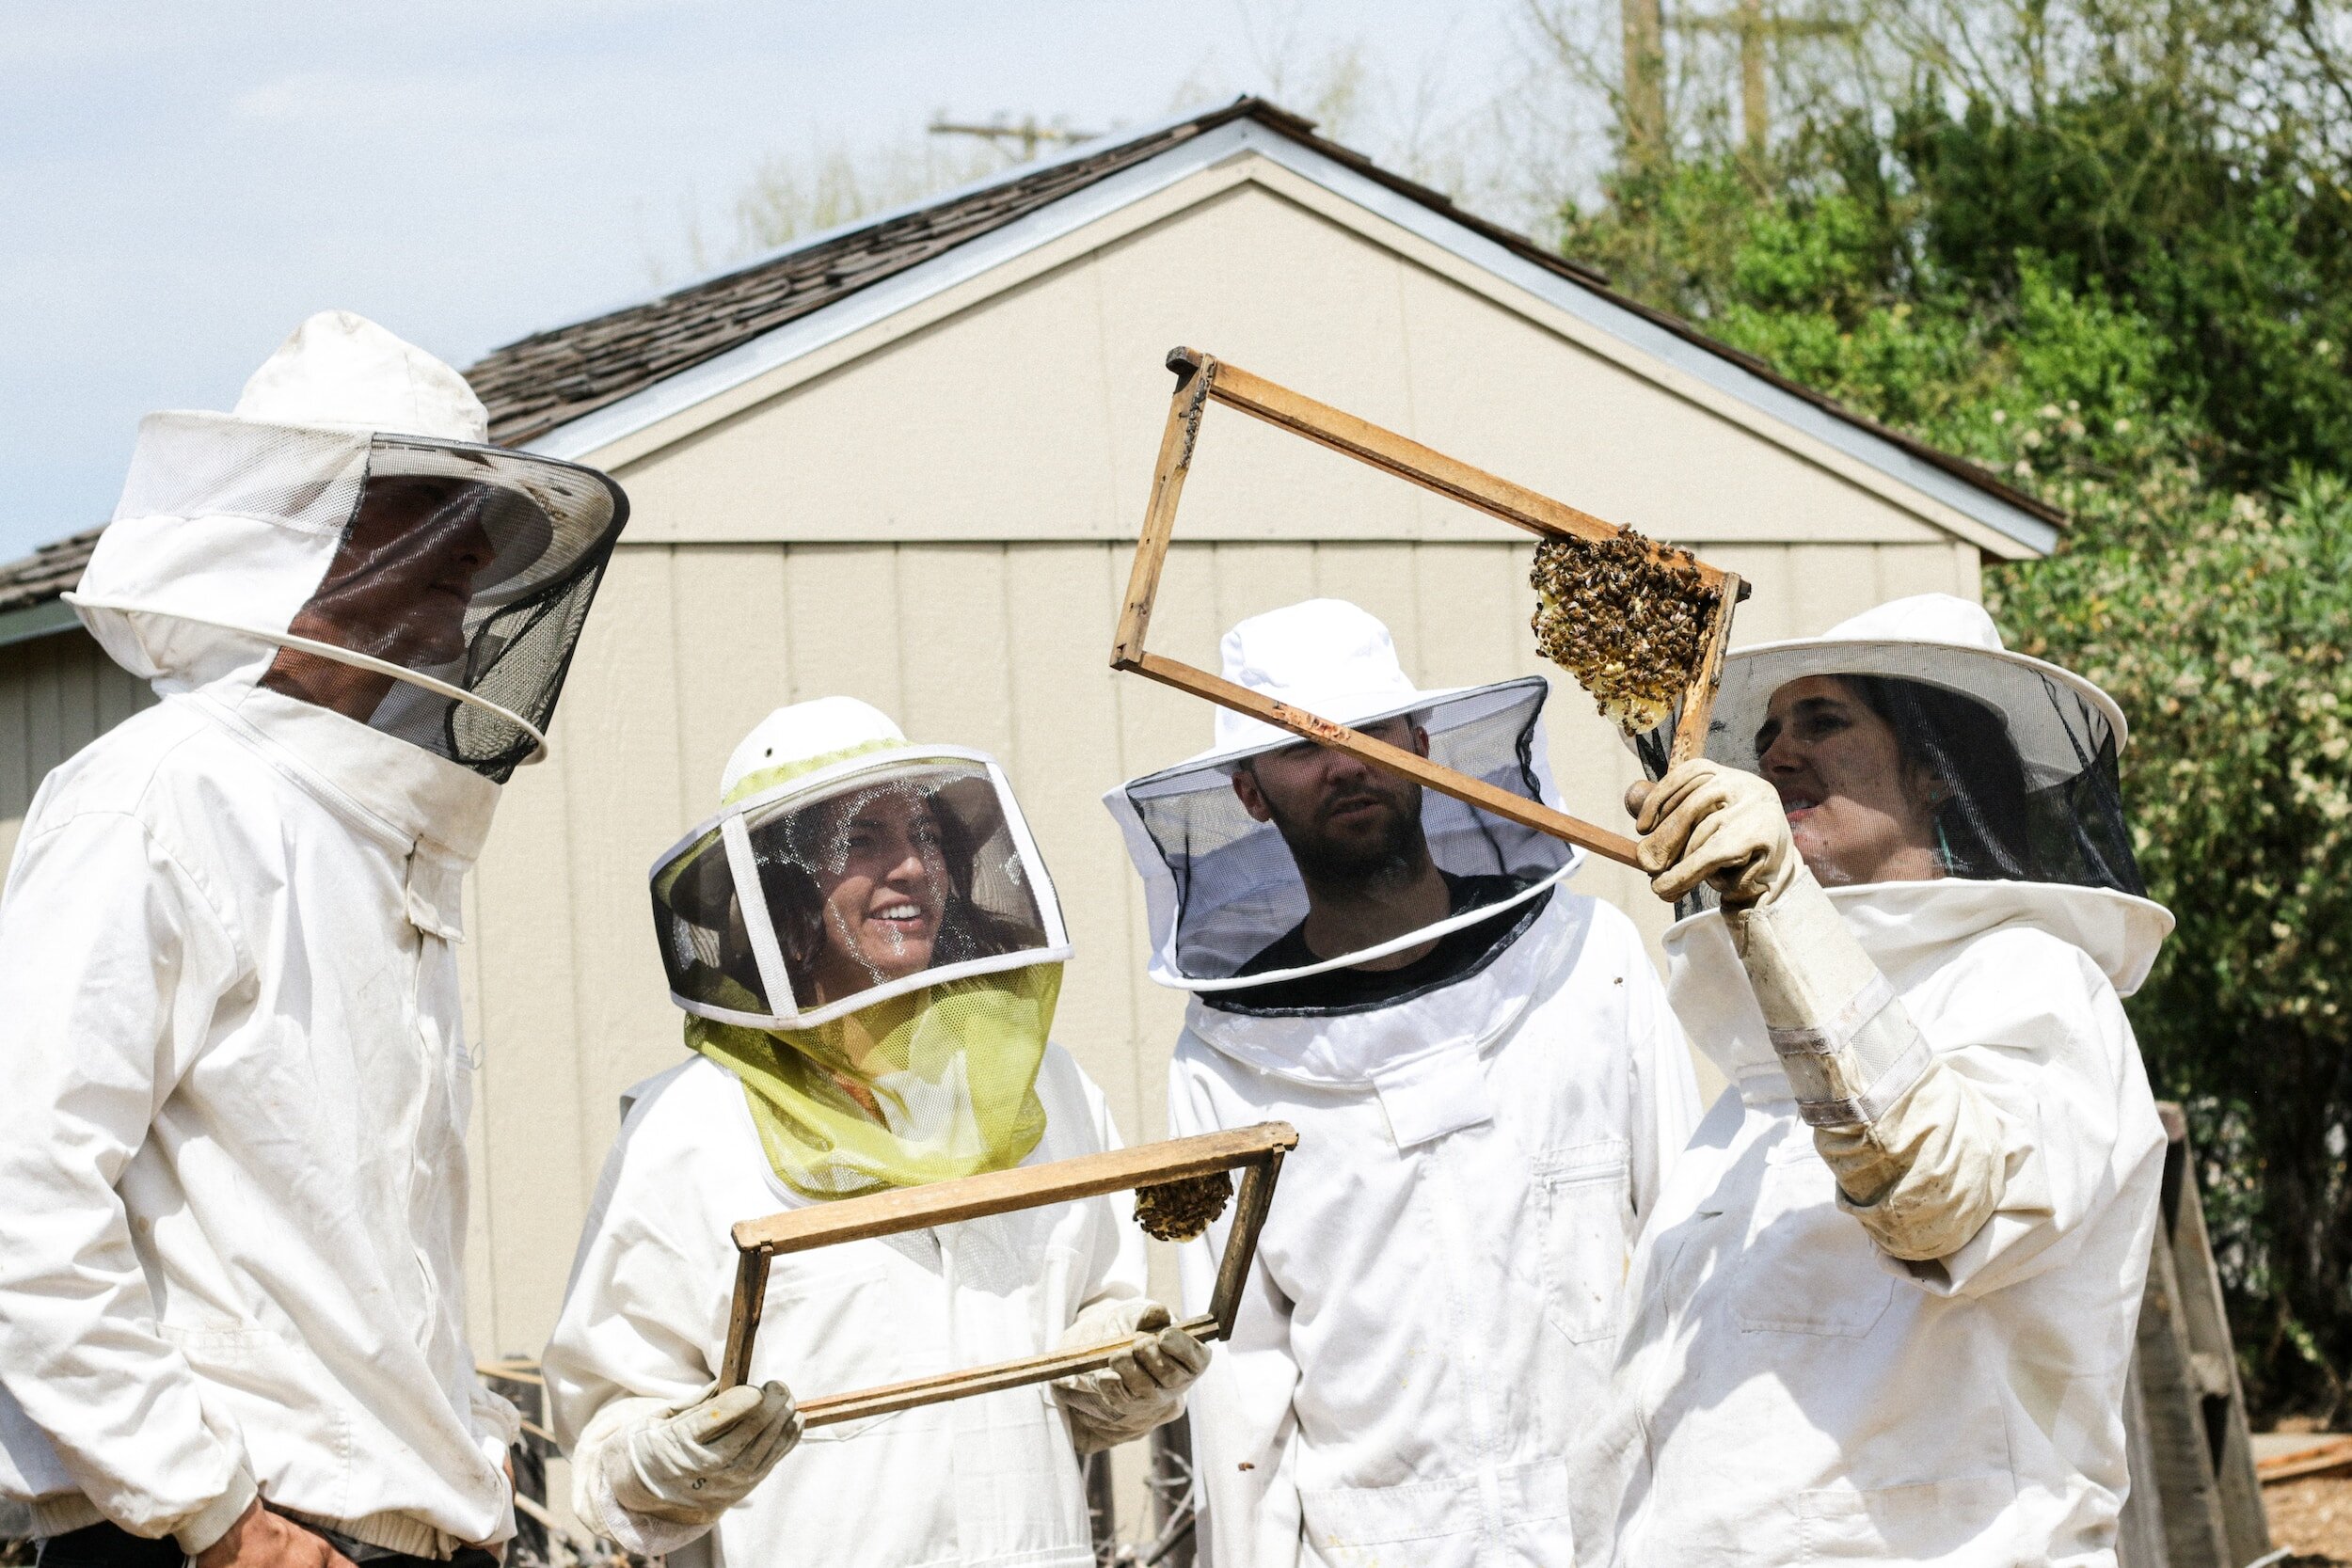 Beekeeping – From Science to Practice